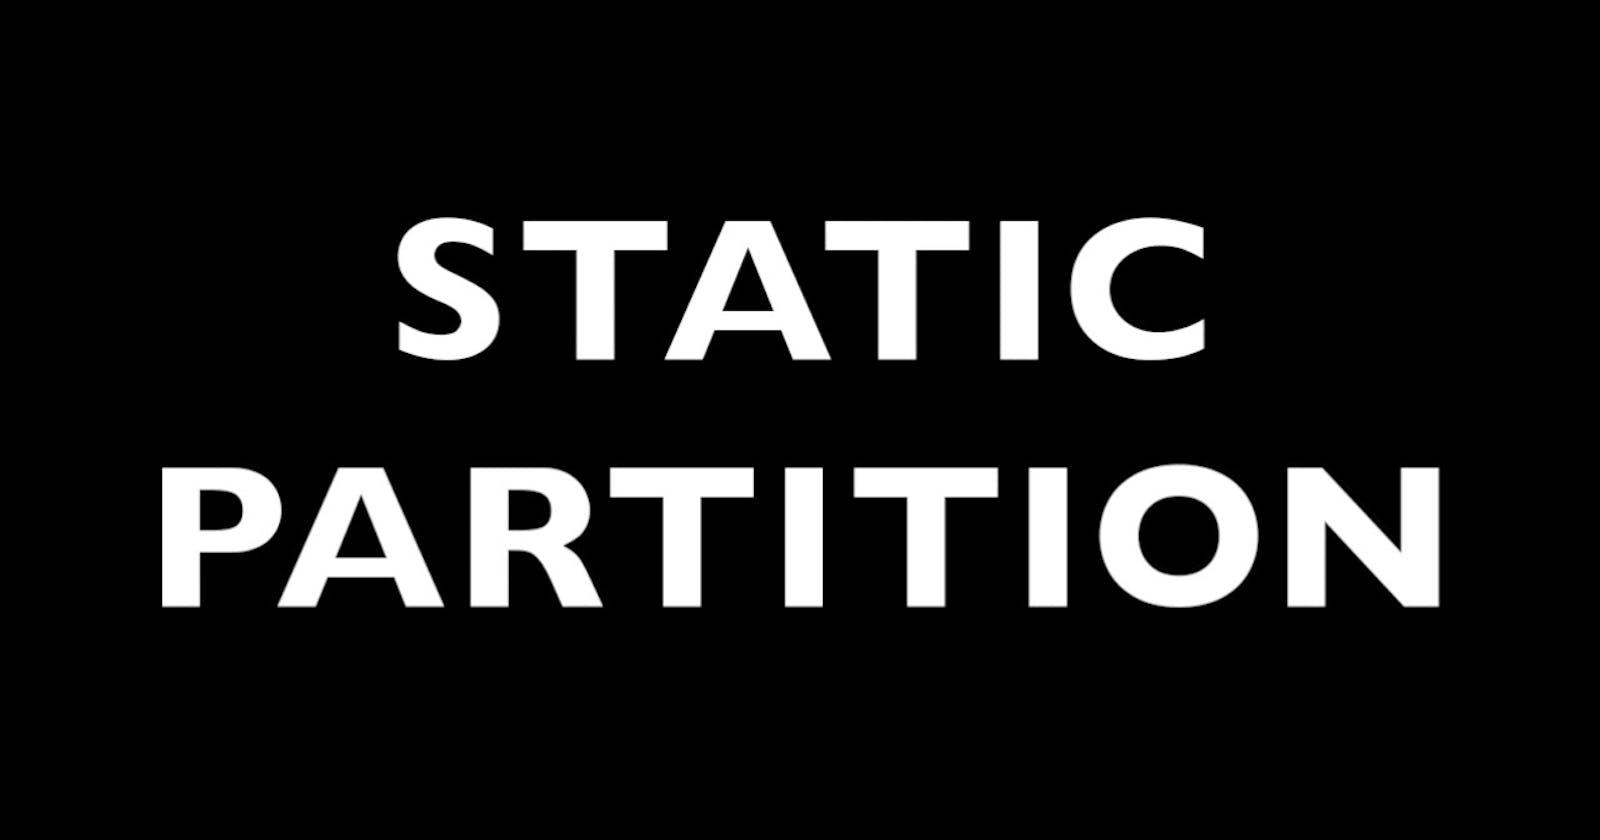 How to Increase or Decrease the Size of Static Partition in Linux.